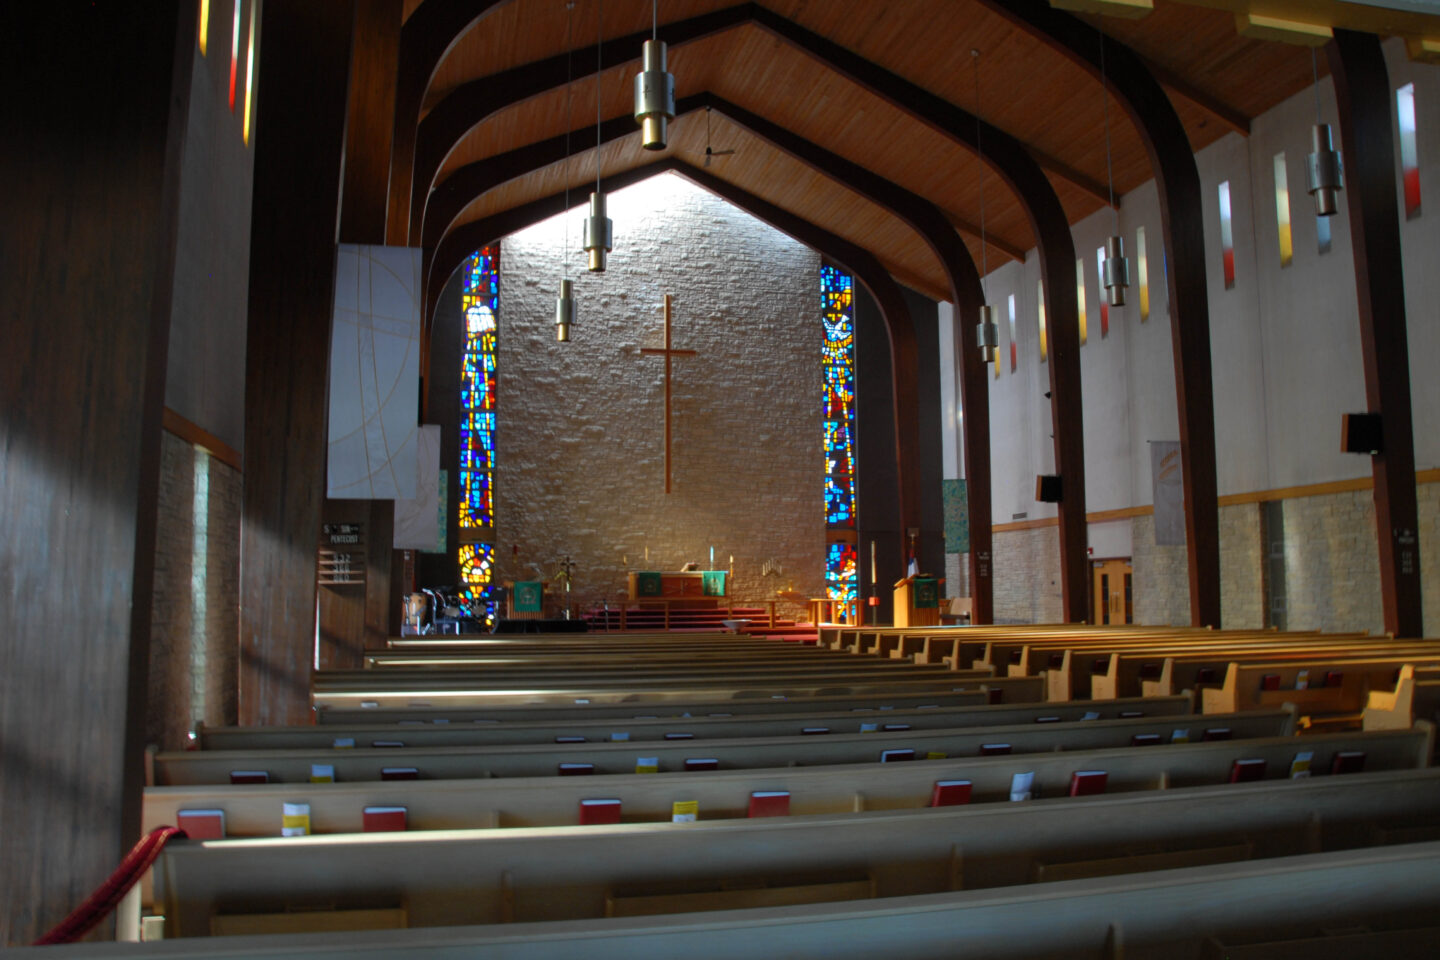 View of Zion Lutheran Church sanctuary features high wood ceilings and stained glass panels